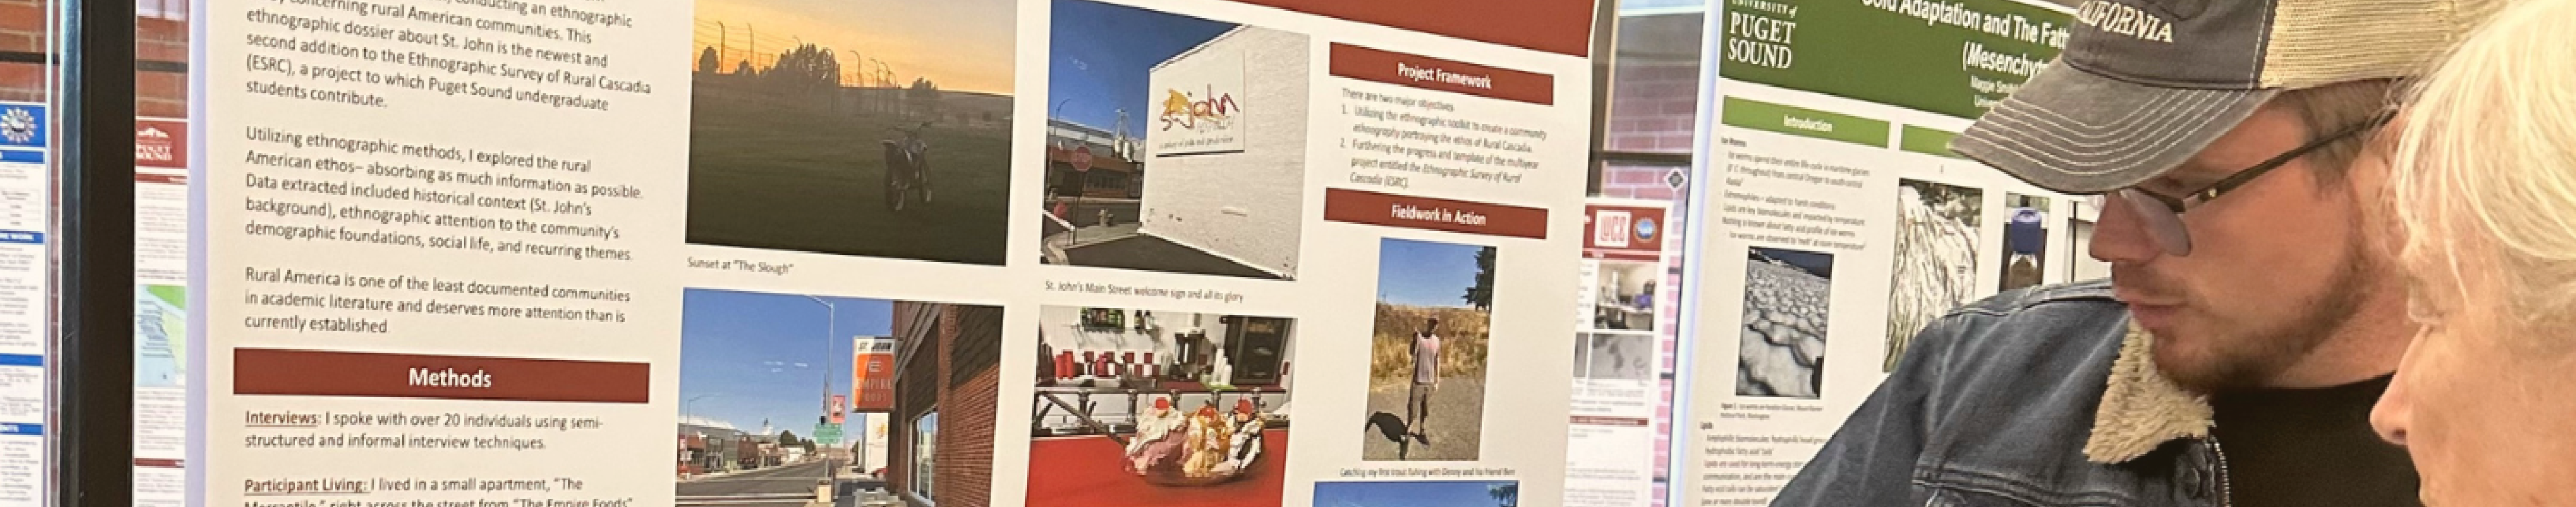 Soan Research Roundup banner